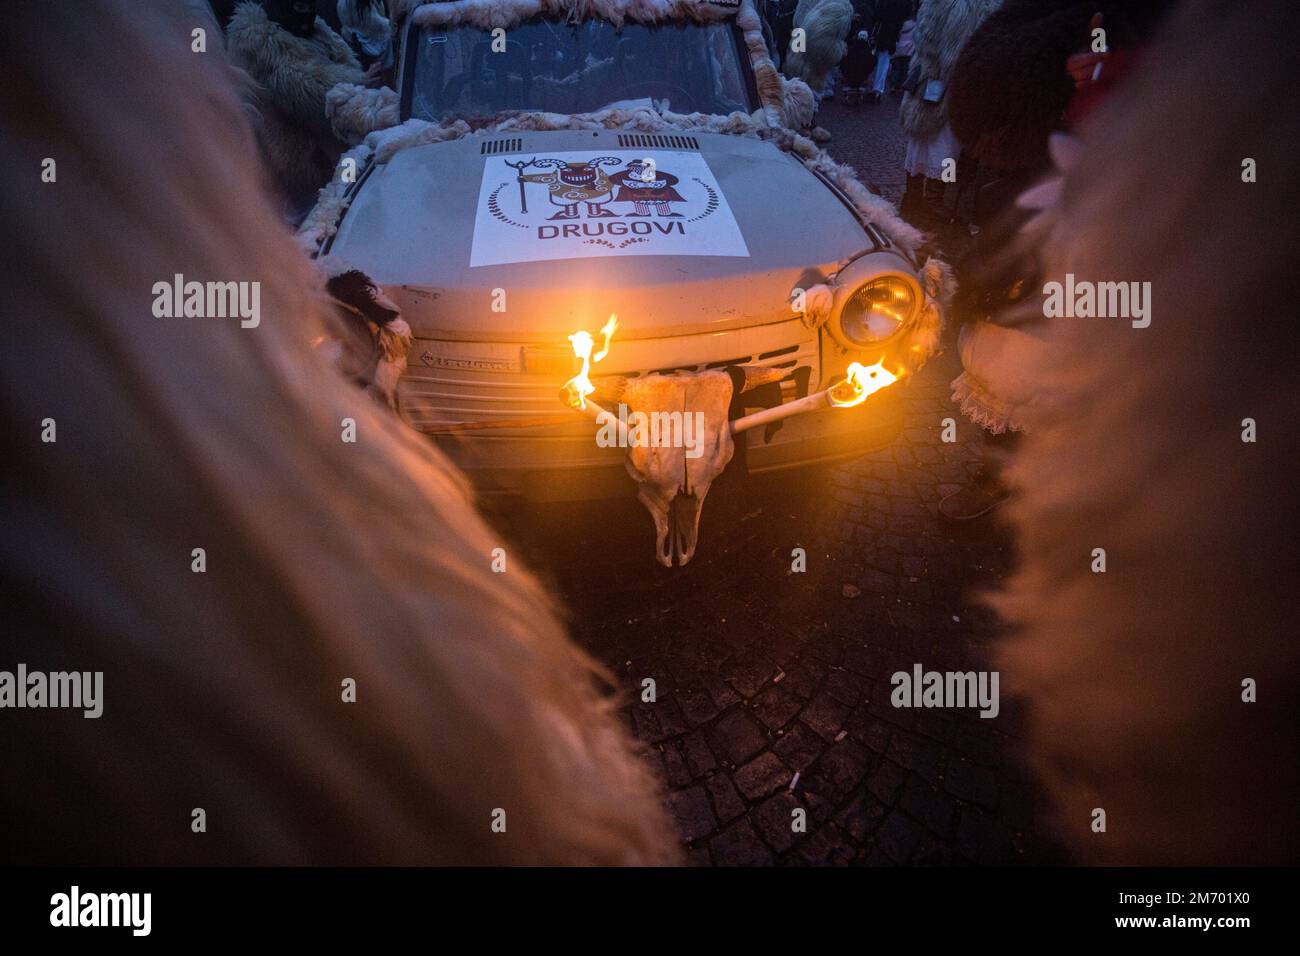 Decorated Trabant car during the annual Buso festivities / Poklade from Mohacs, Hungary Stock Photo